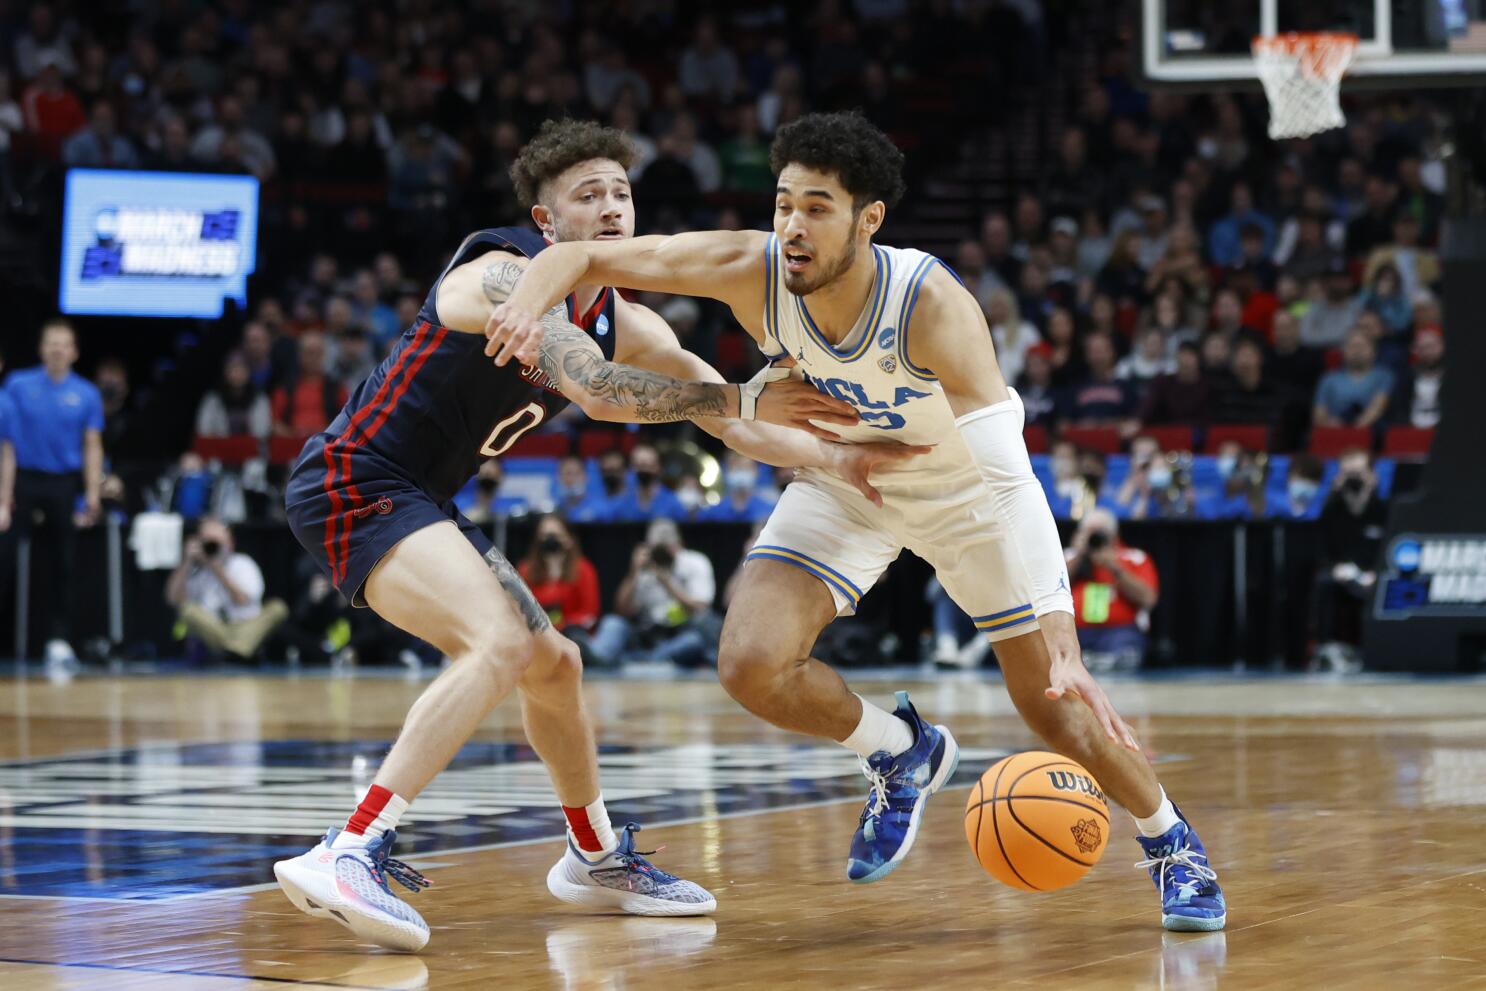 Bruins guard Johnny Juzang sneakers during a college basketball